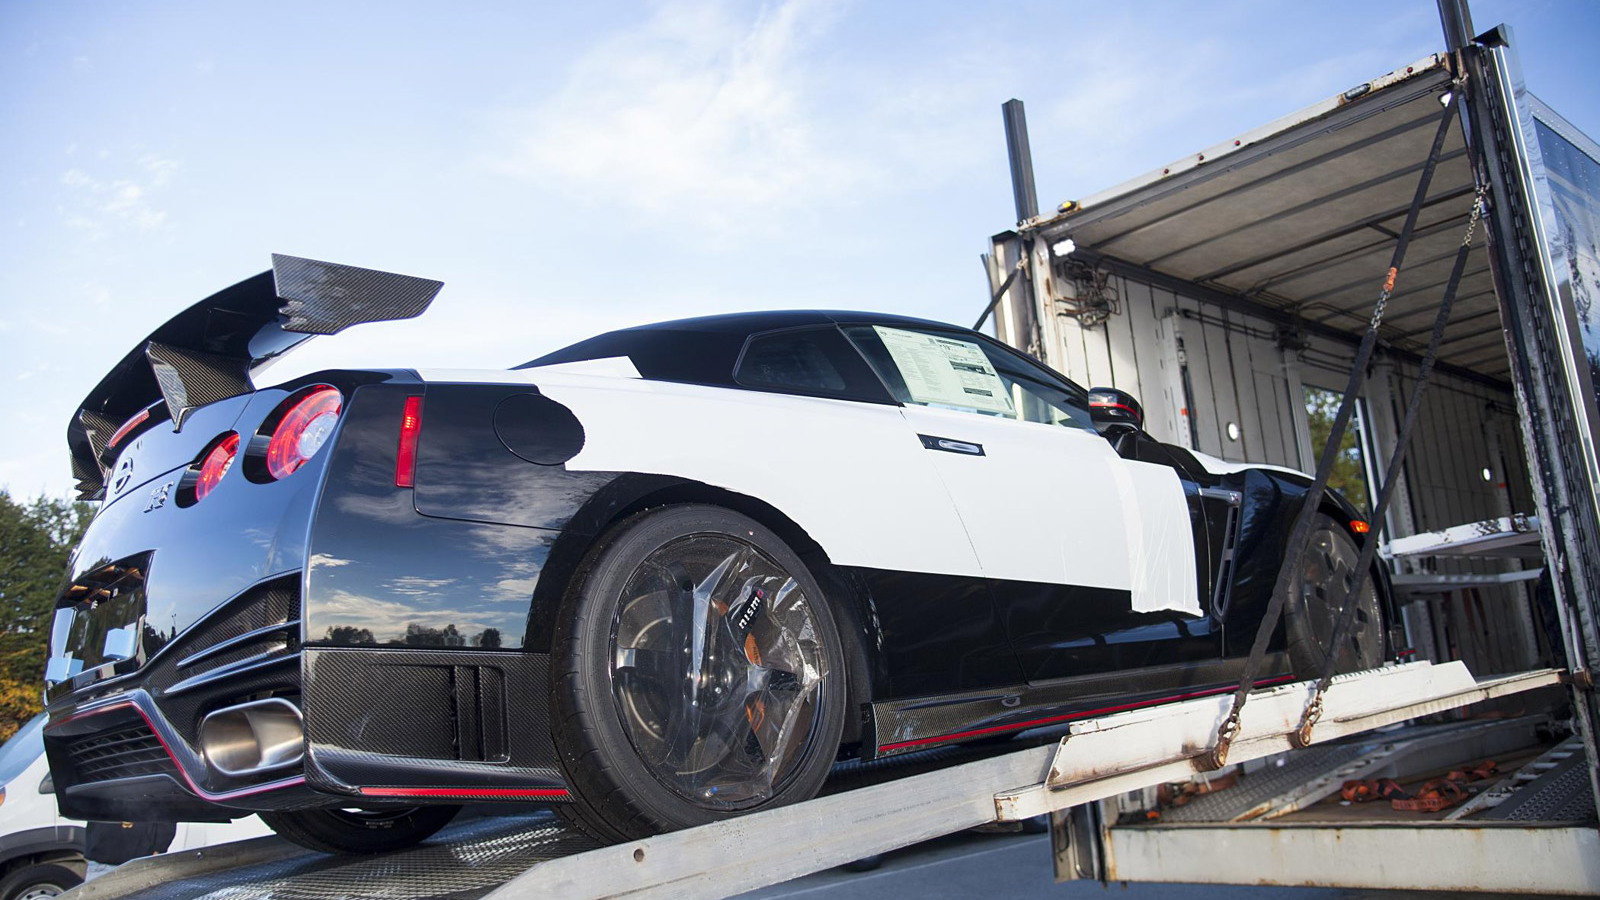 Matt McCulloh takes delivery of the first 2015 Nissan GT-R NISMO in the U.S.